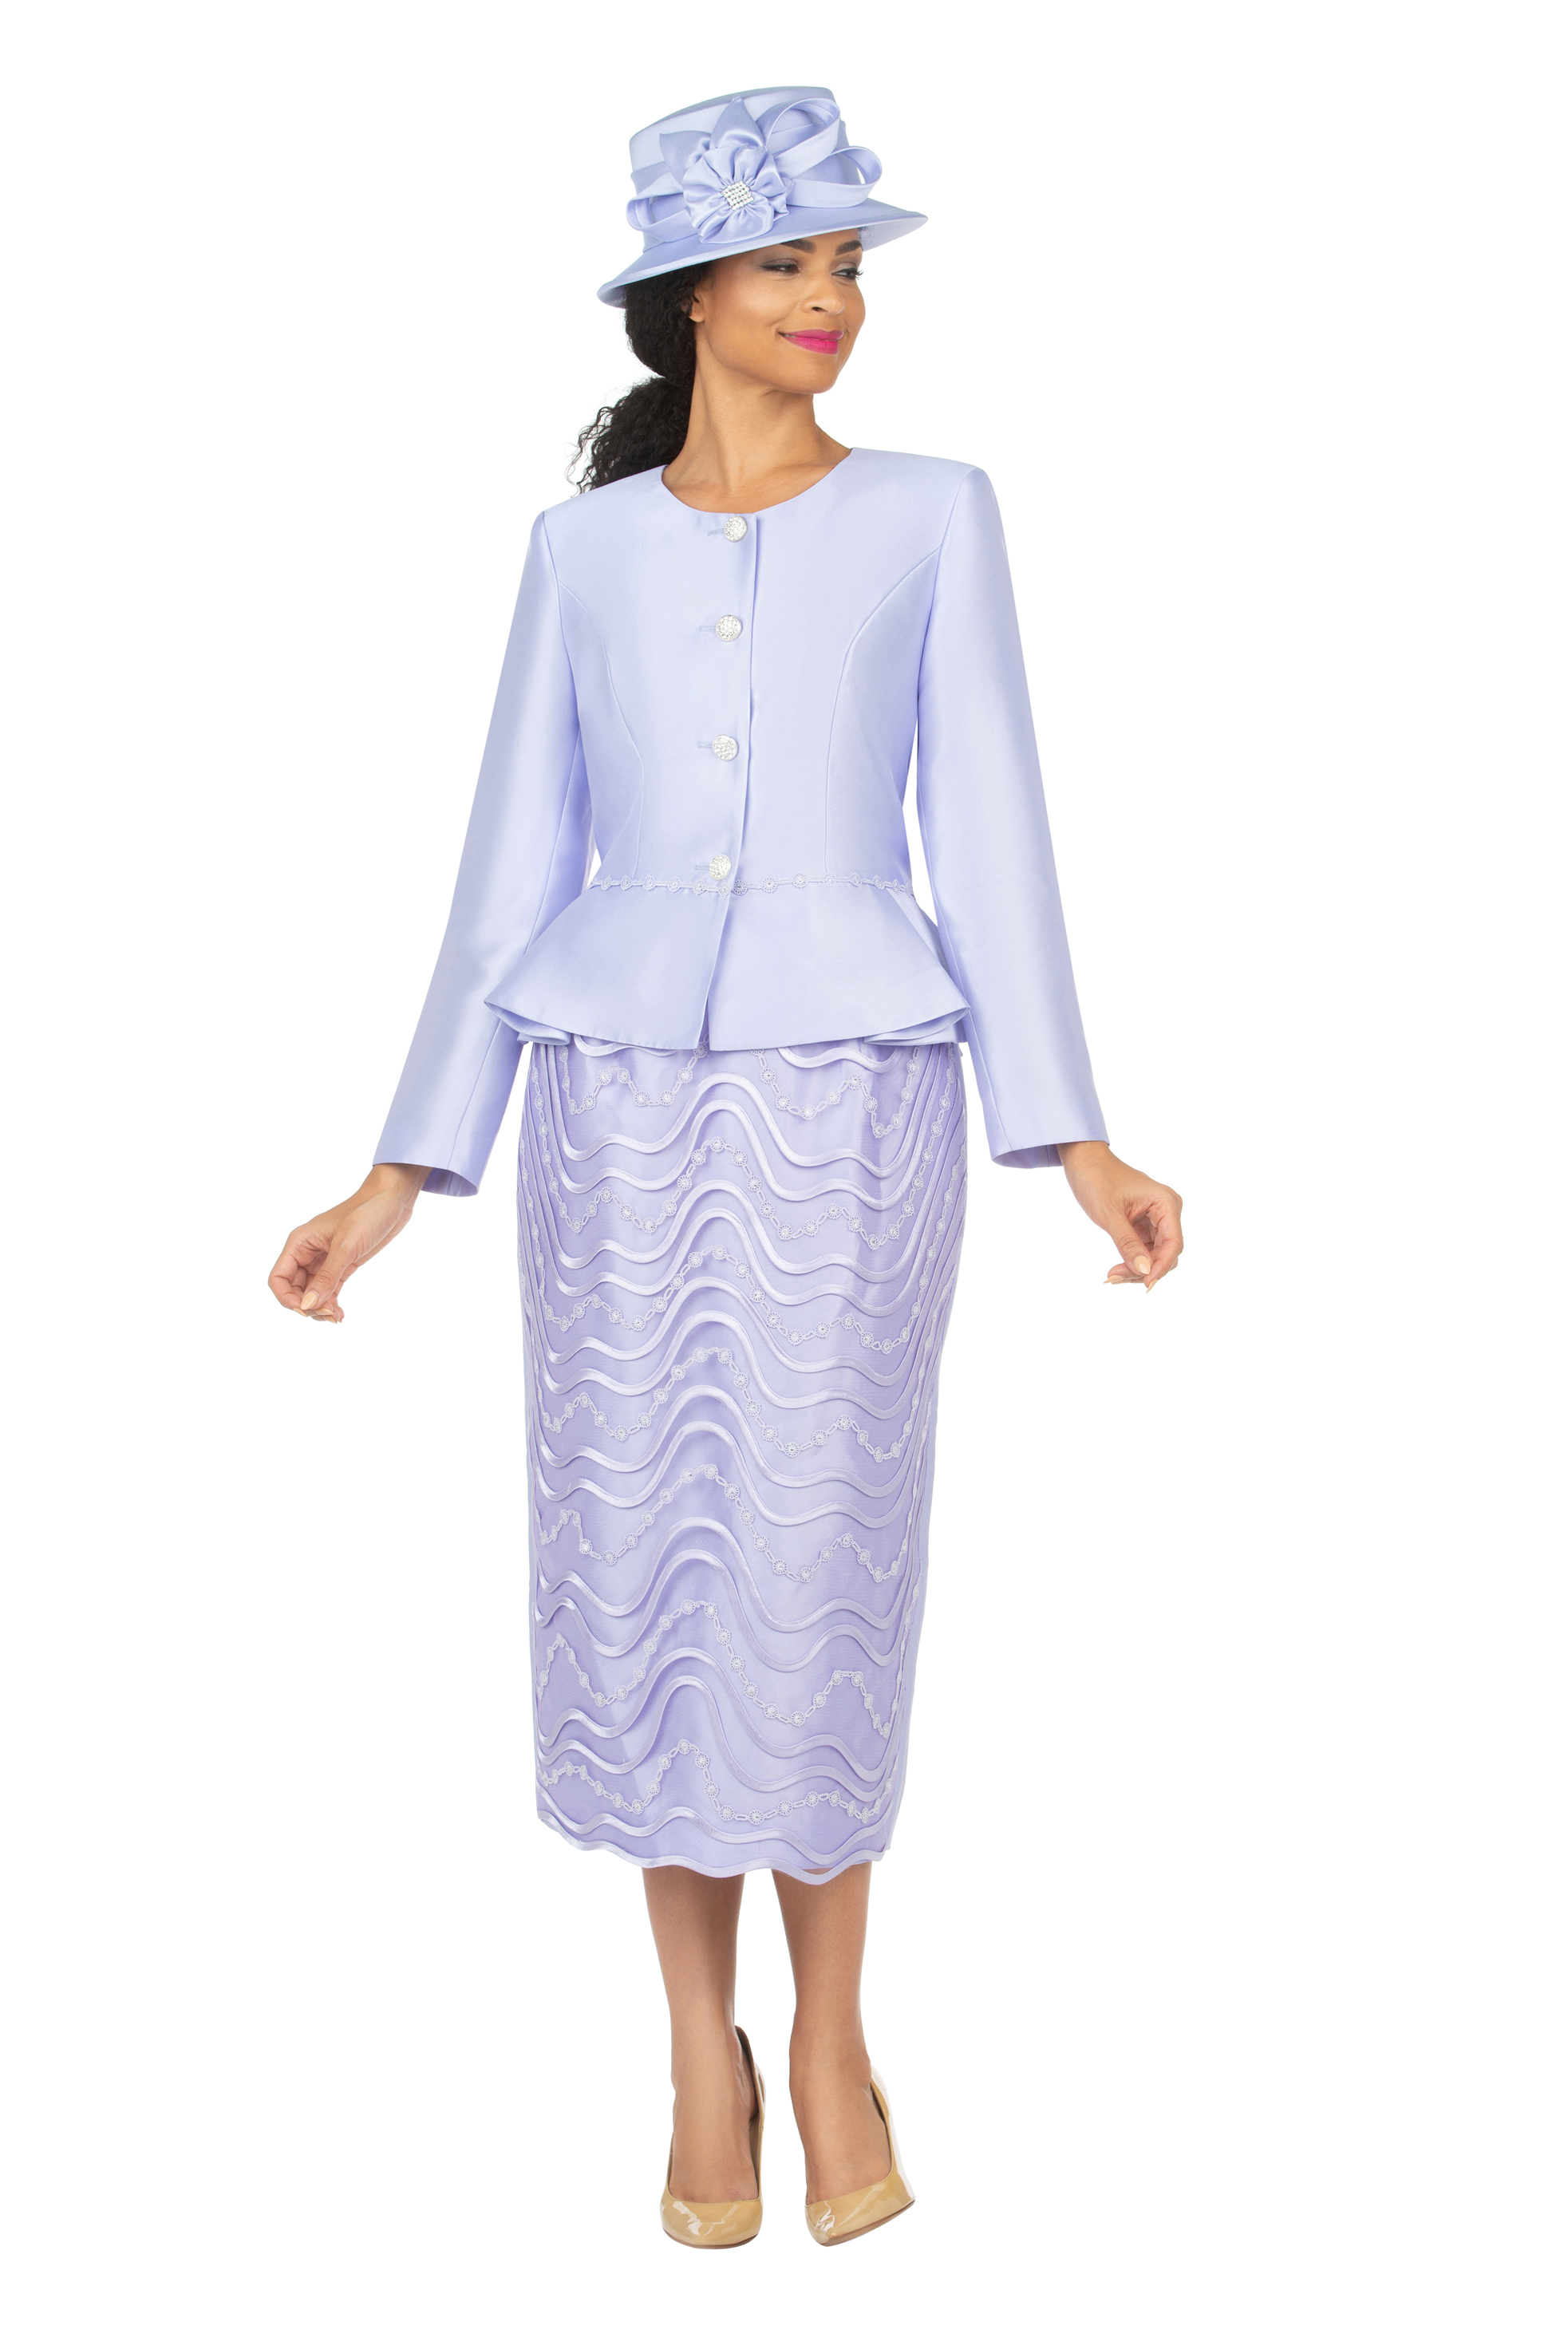 Elegance Fashions | Giovanna G1156 2Pc Skirt Suit - in 4 Colors